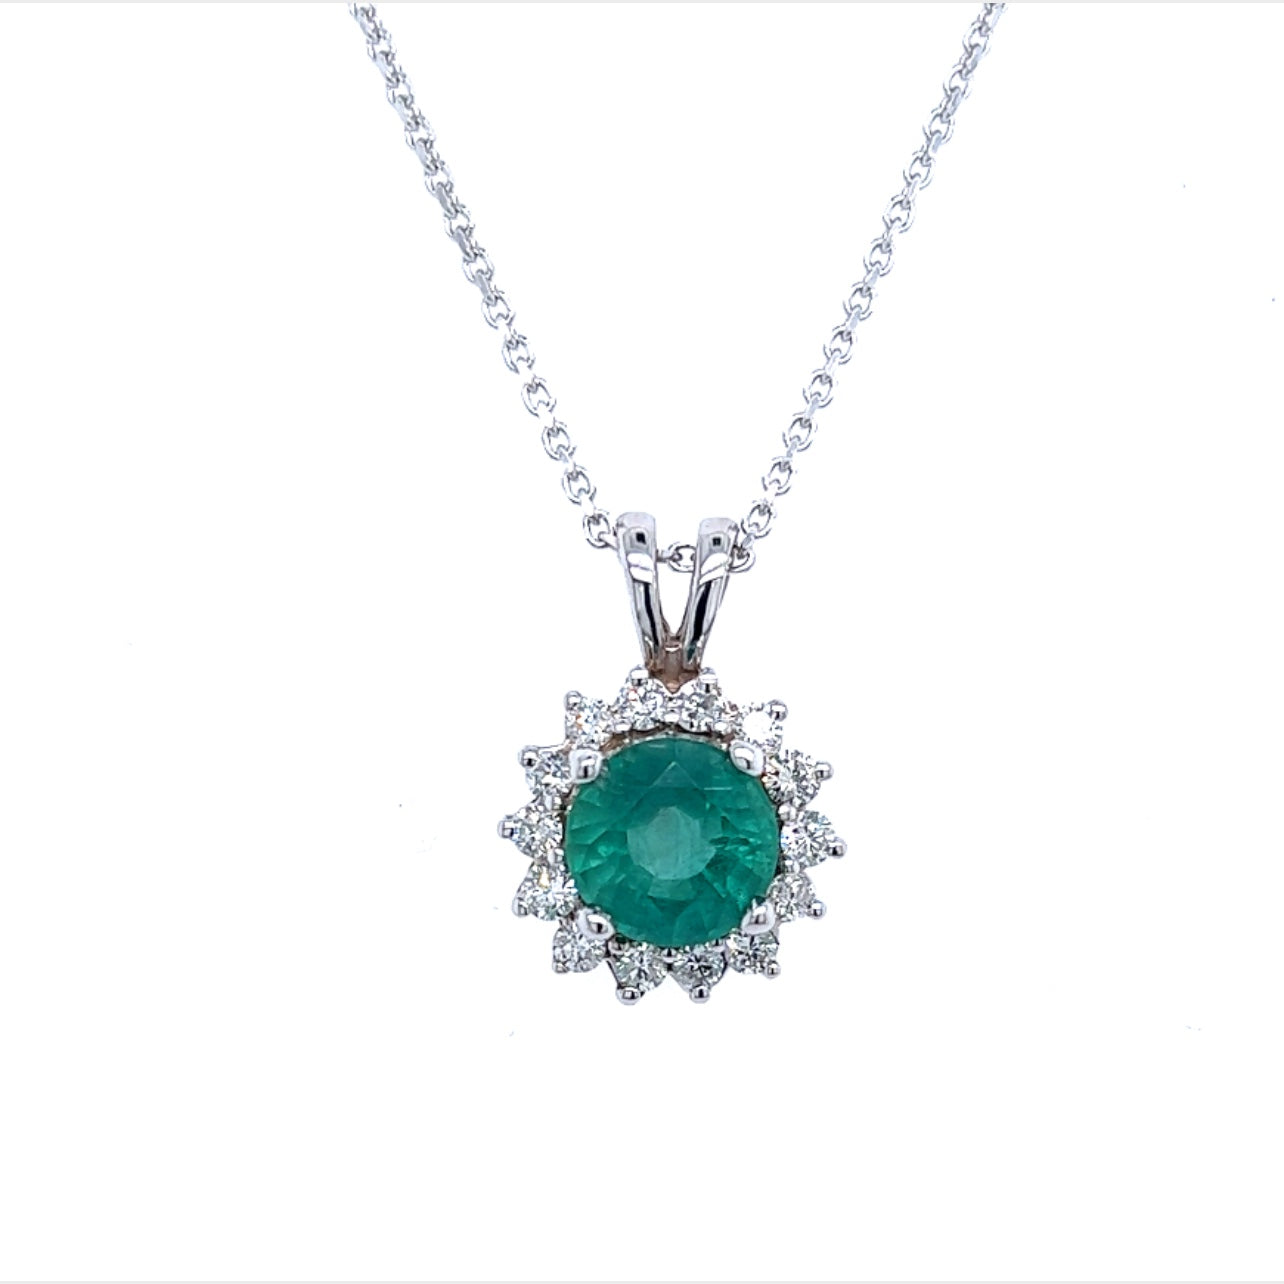 Natural Emerald Diamond Pendant With Chain 17.5" 14k White Gold 2 TCW Certified $5,950 216664